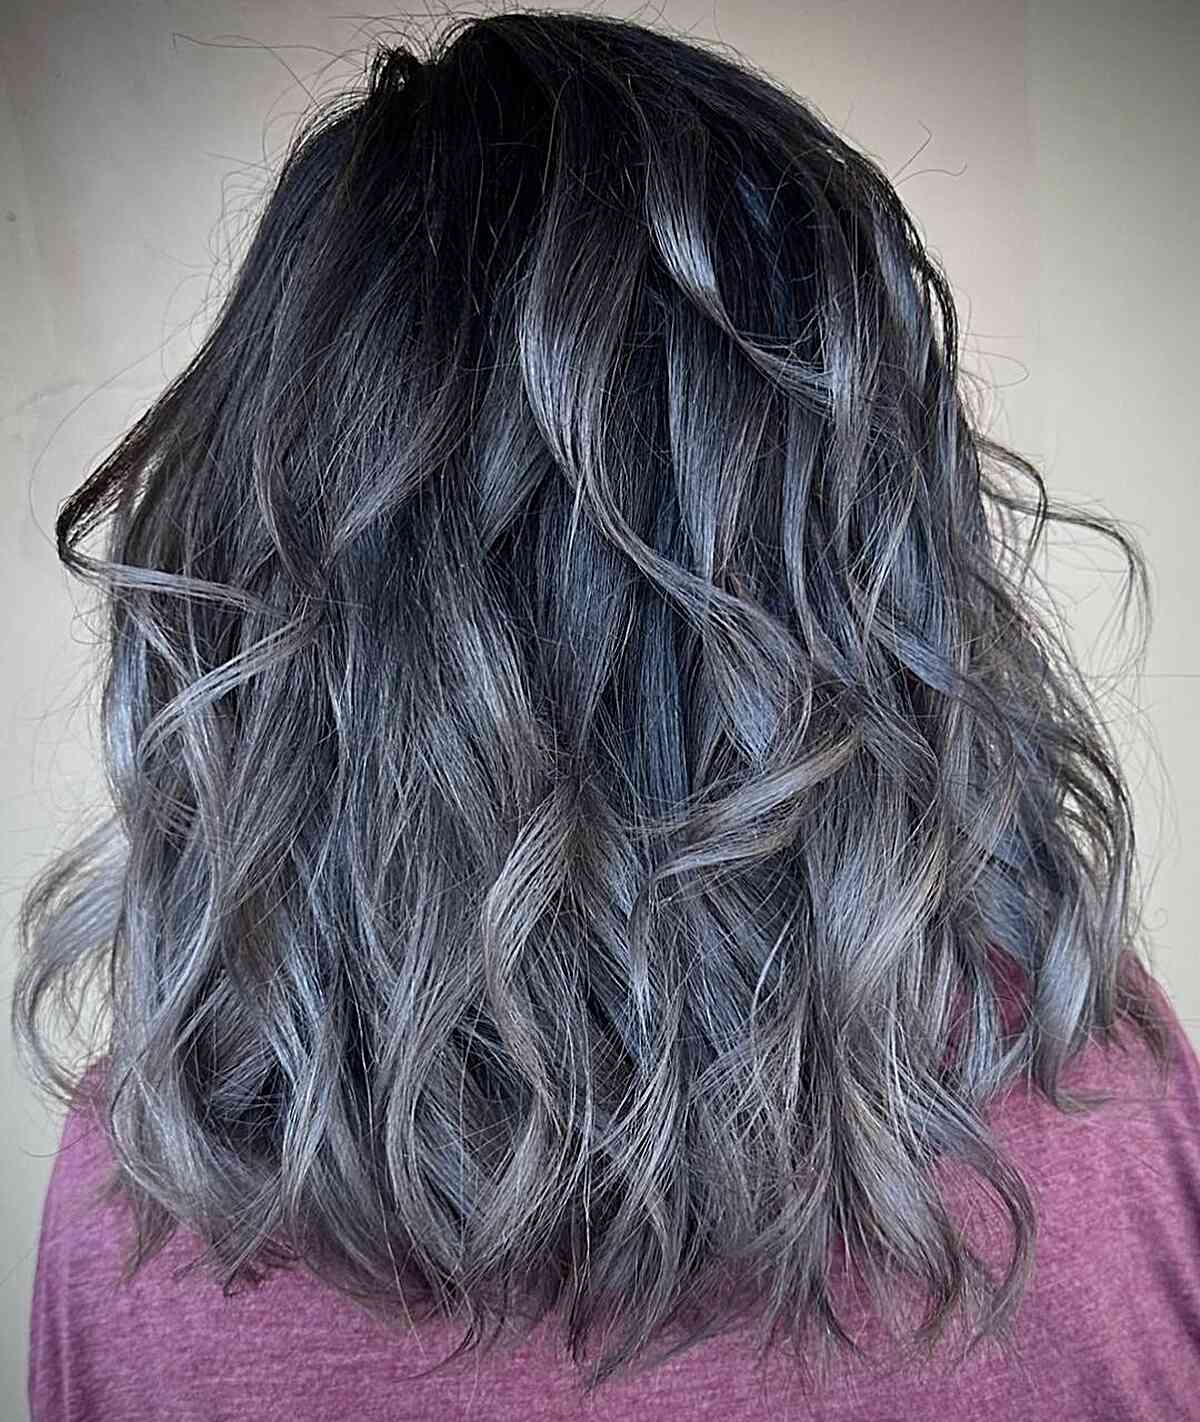 Shoulder-Length Silver Gray Balayage Hair with Tousled Waves